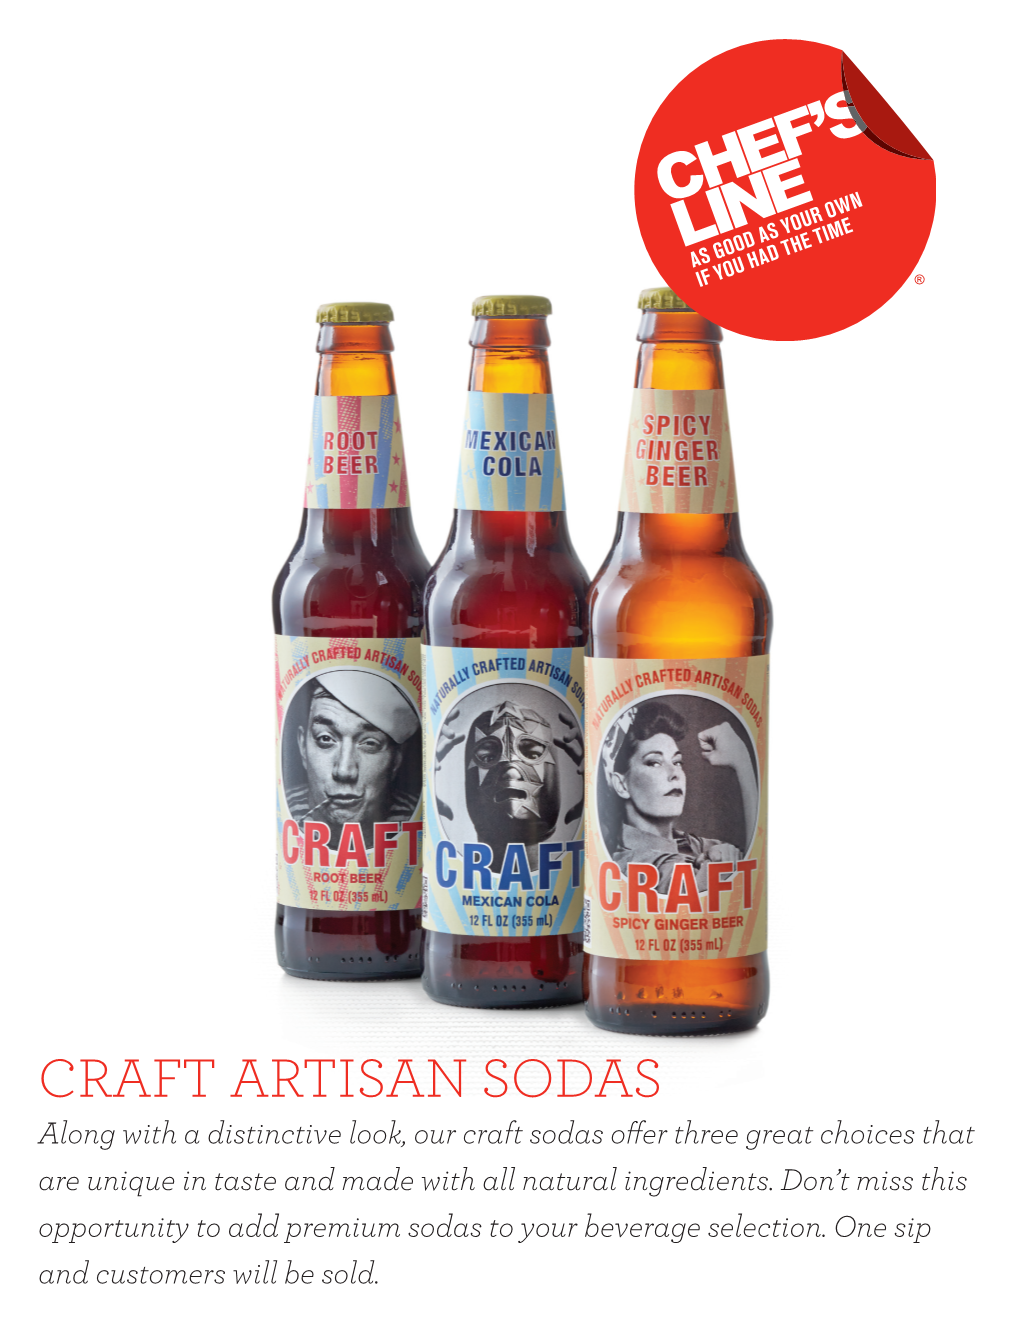 CRAFT ARTISAN SODAS Along with a Distinctive Look, Our Craft Sodas Offer Three Great Choices That Are Unique in Taste and Made with All Natural Ingredients